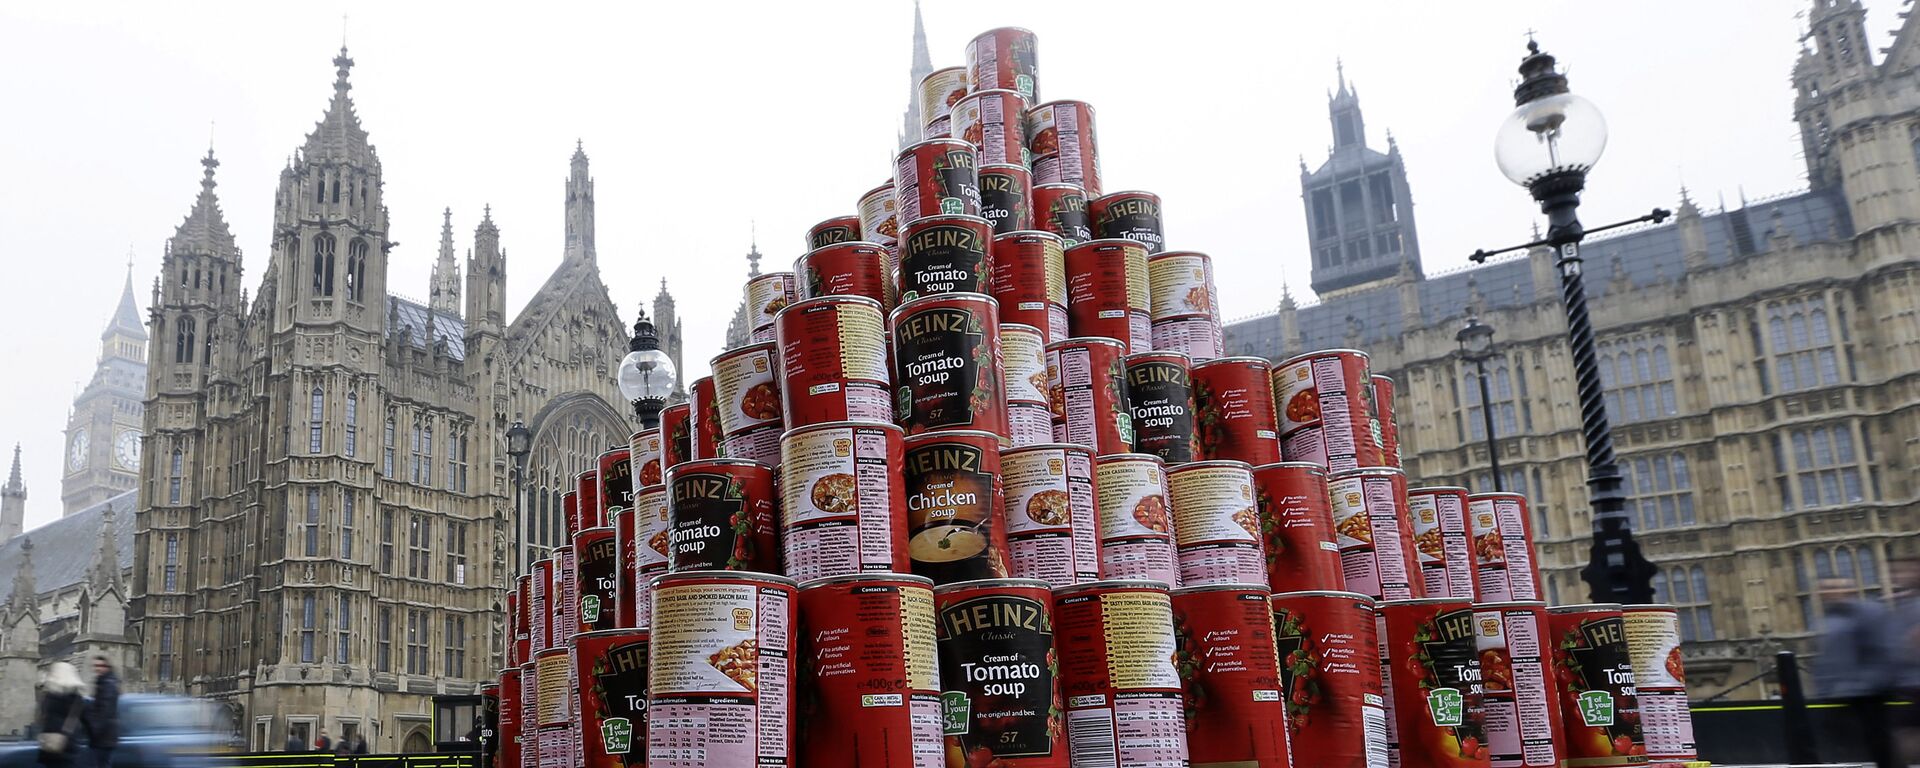 A pyramid of 468 cans of soup during a media event outside the Palace of Westminster to highlight food bank dependency. - Sputnik International, 1920, 31.08.2022